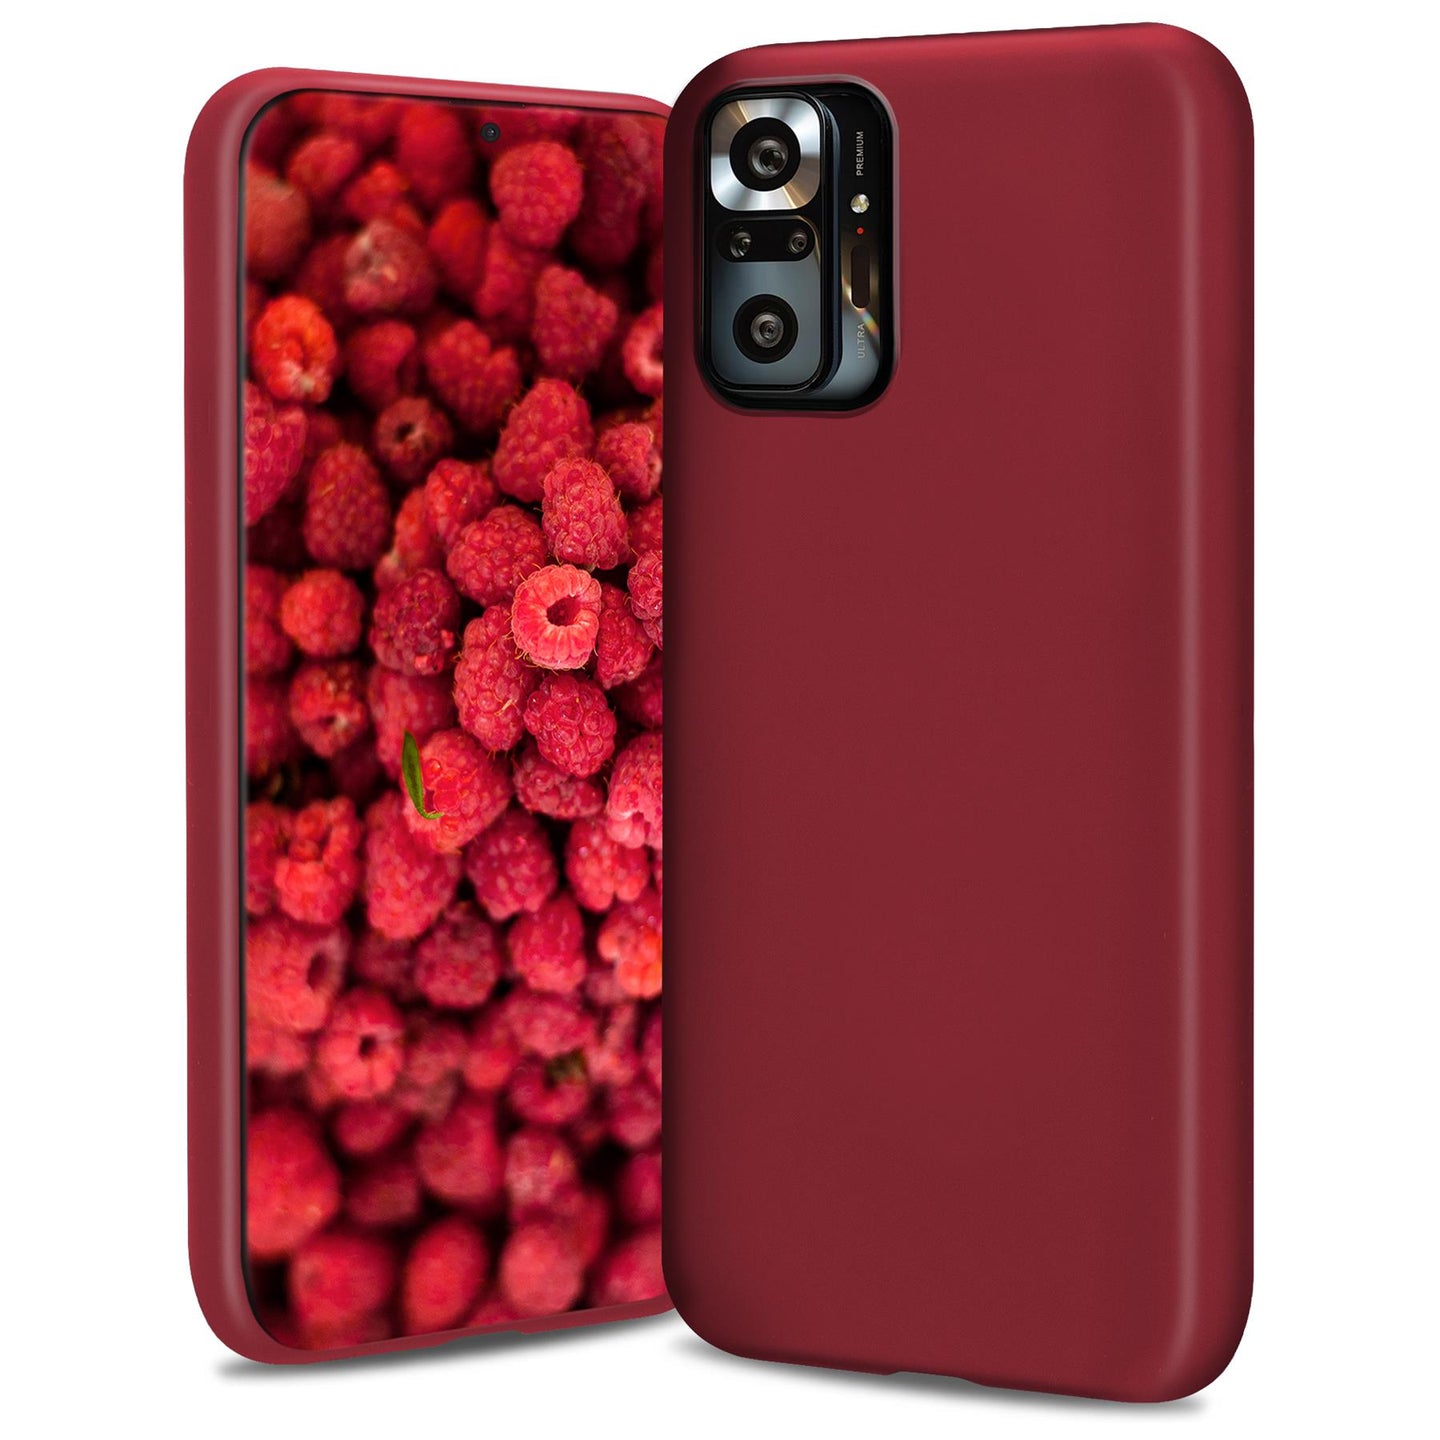 Moozy Lifestyle. Silicone Case for Xiaomi Redmi Note 10 Pro, Redmi Note 10 Pro Max, Vintage Pink - Liquid Silicone Lightweight Cover with Matte Finish